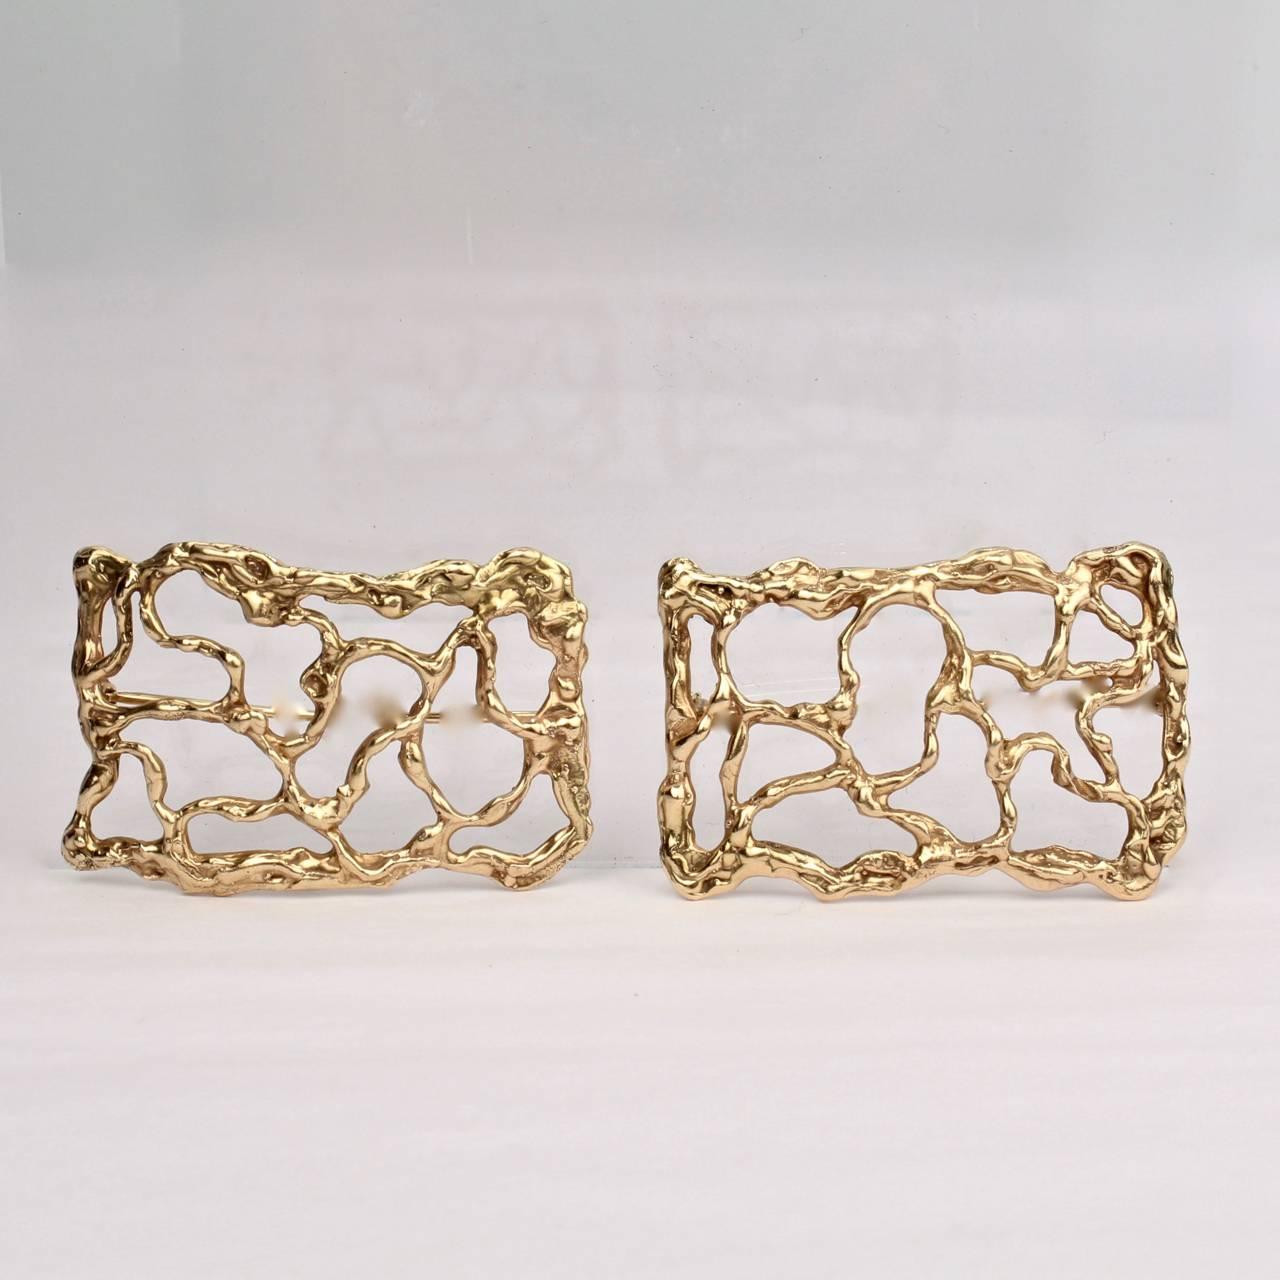 American Pair of Artist Signed 14-Karat Gold Brutalist Brooches or Pins